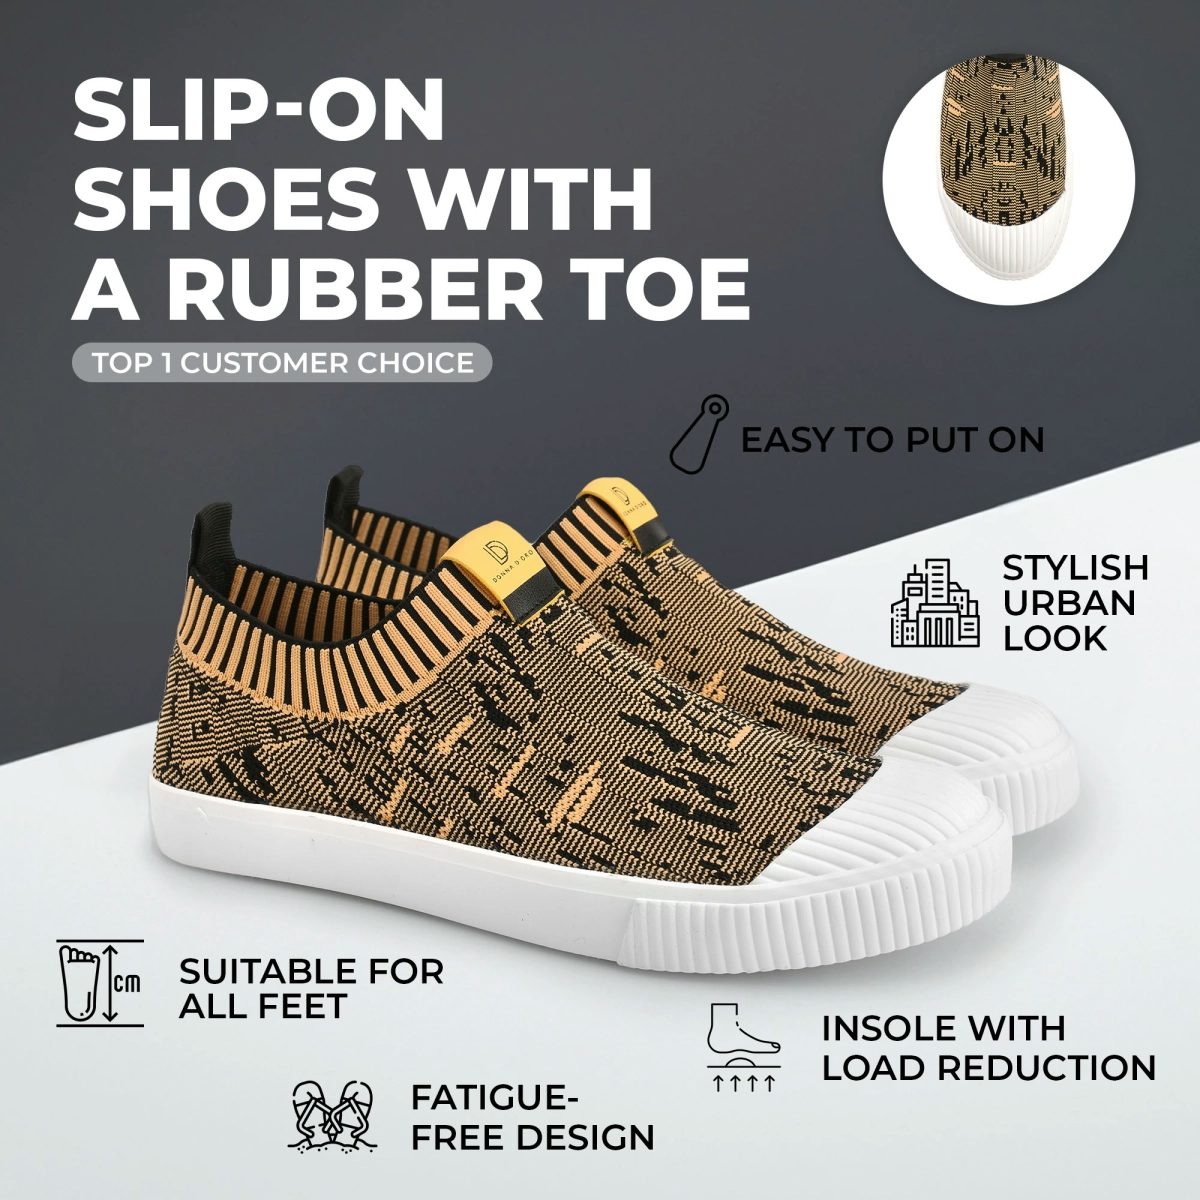 Slip-on shoes with a rubber toe